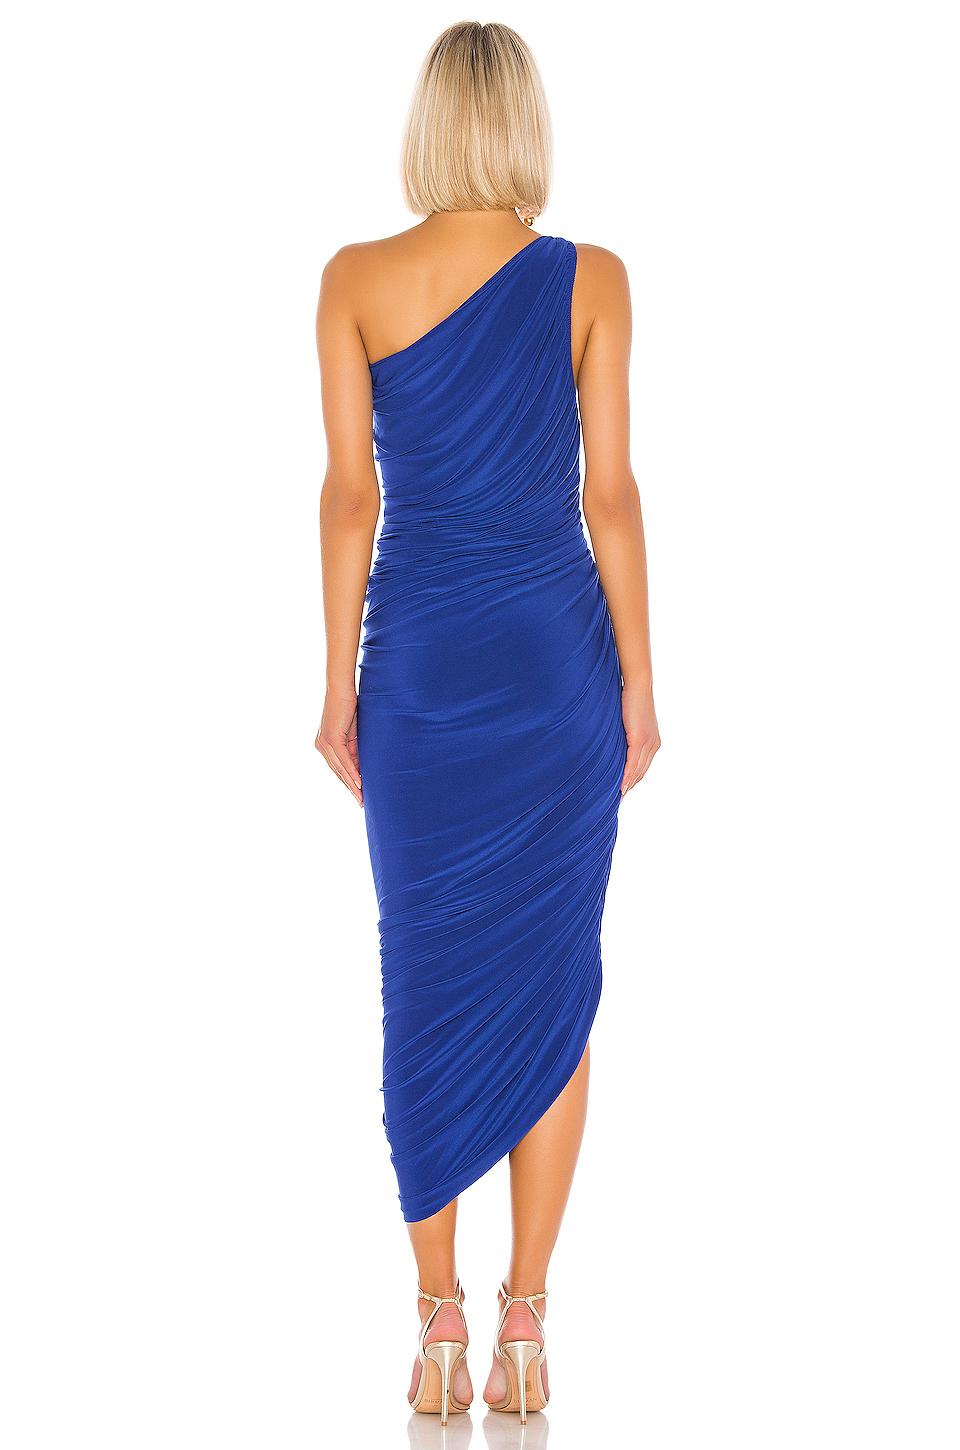 Norma Kamali Synthetic Diana Gown in Berry Blue (Blue) - Save 38% - Lyst